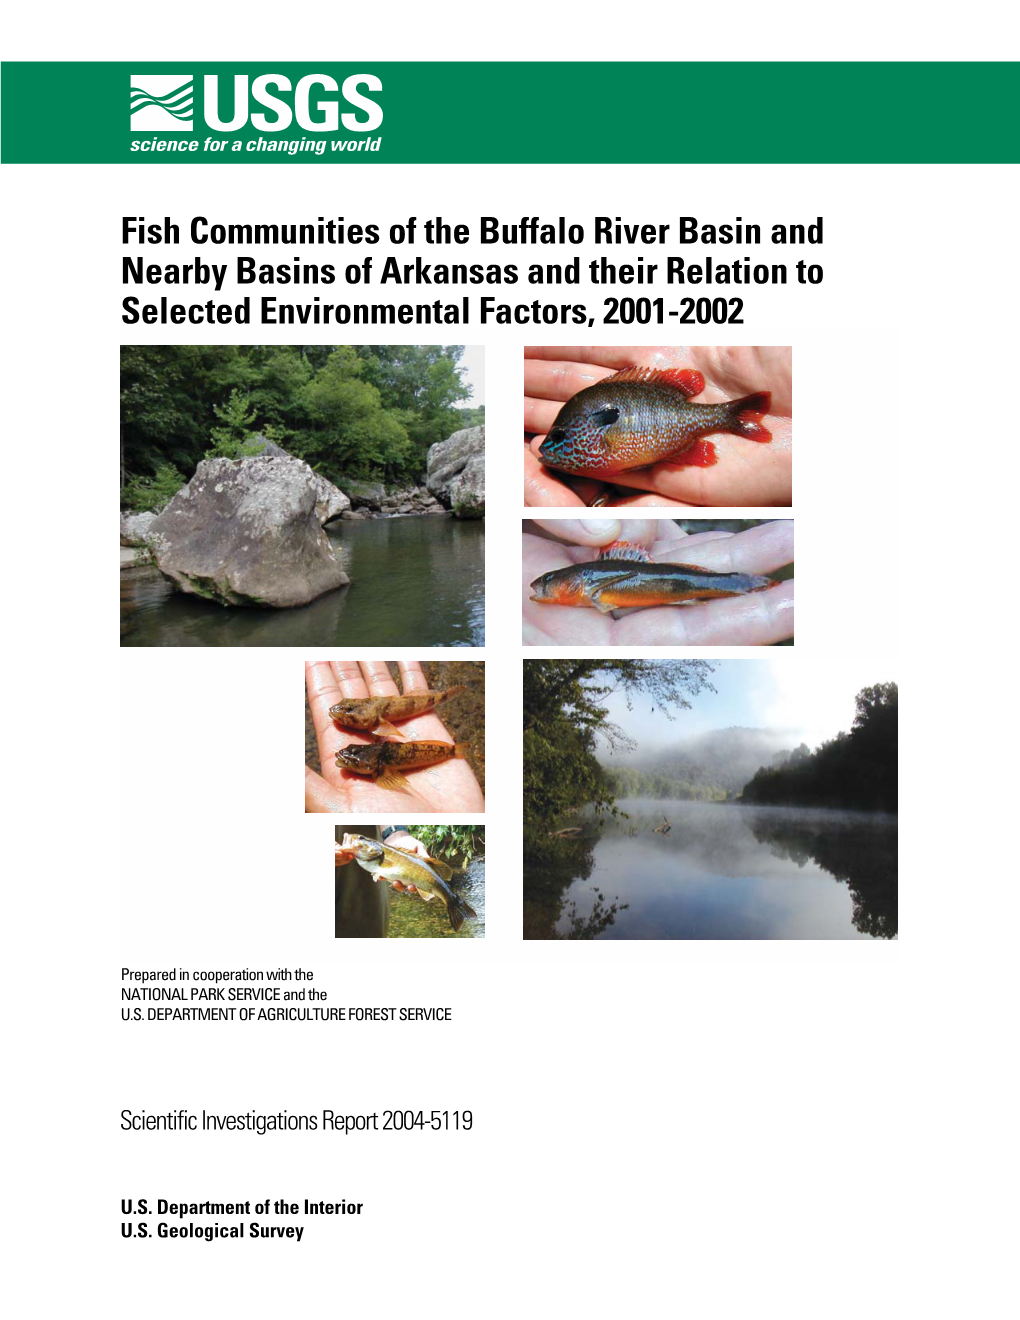 Fish Communities of the Buffalo River Basin and Nearby Basins of Arkansas and Their Relation to Selected Environmental Factors, 2001-2002